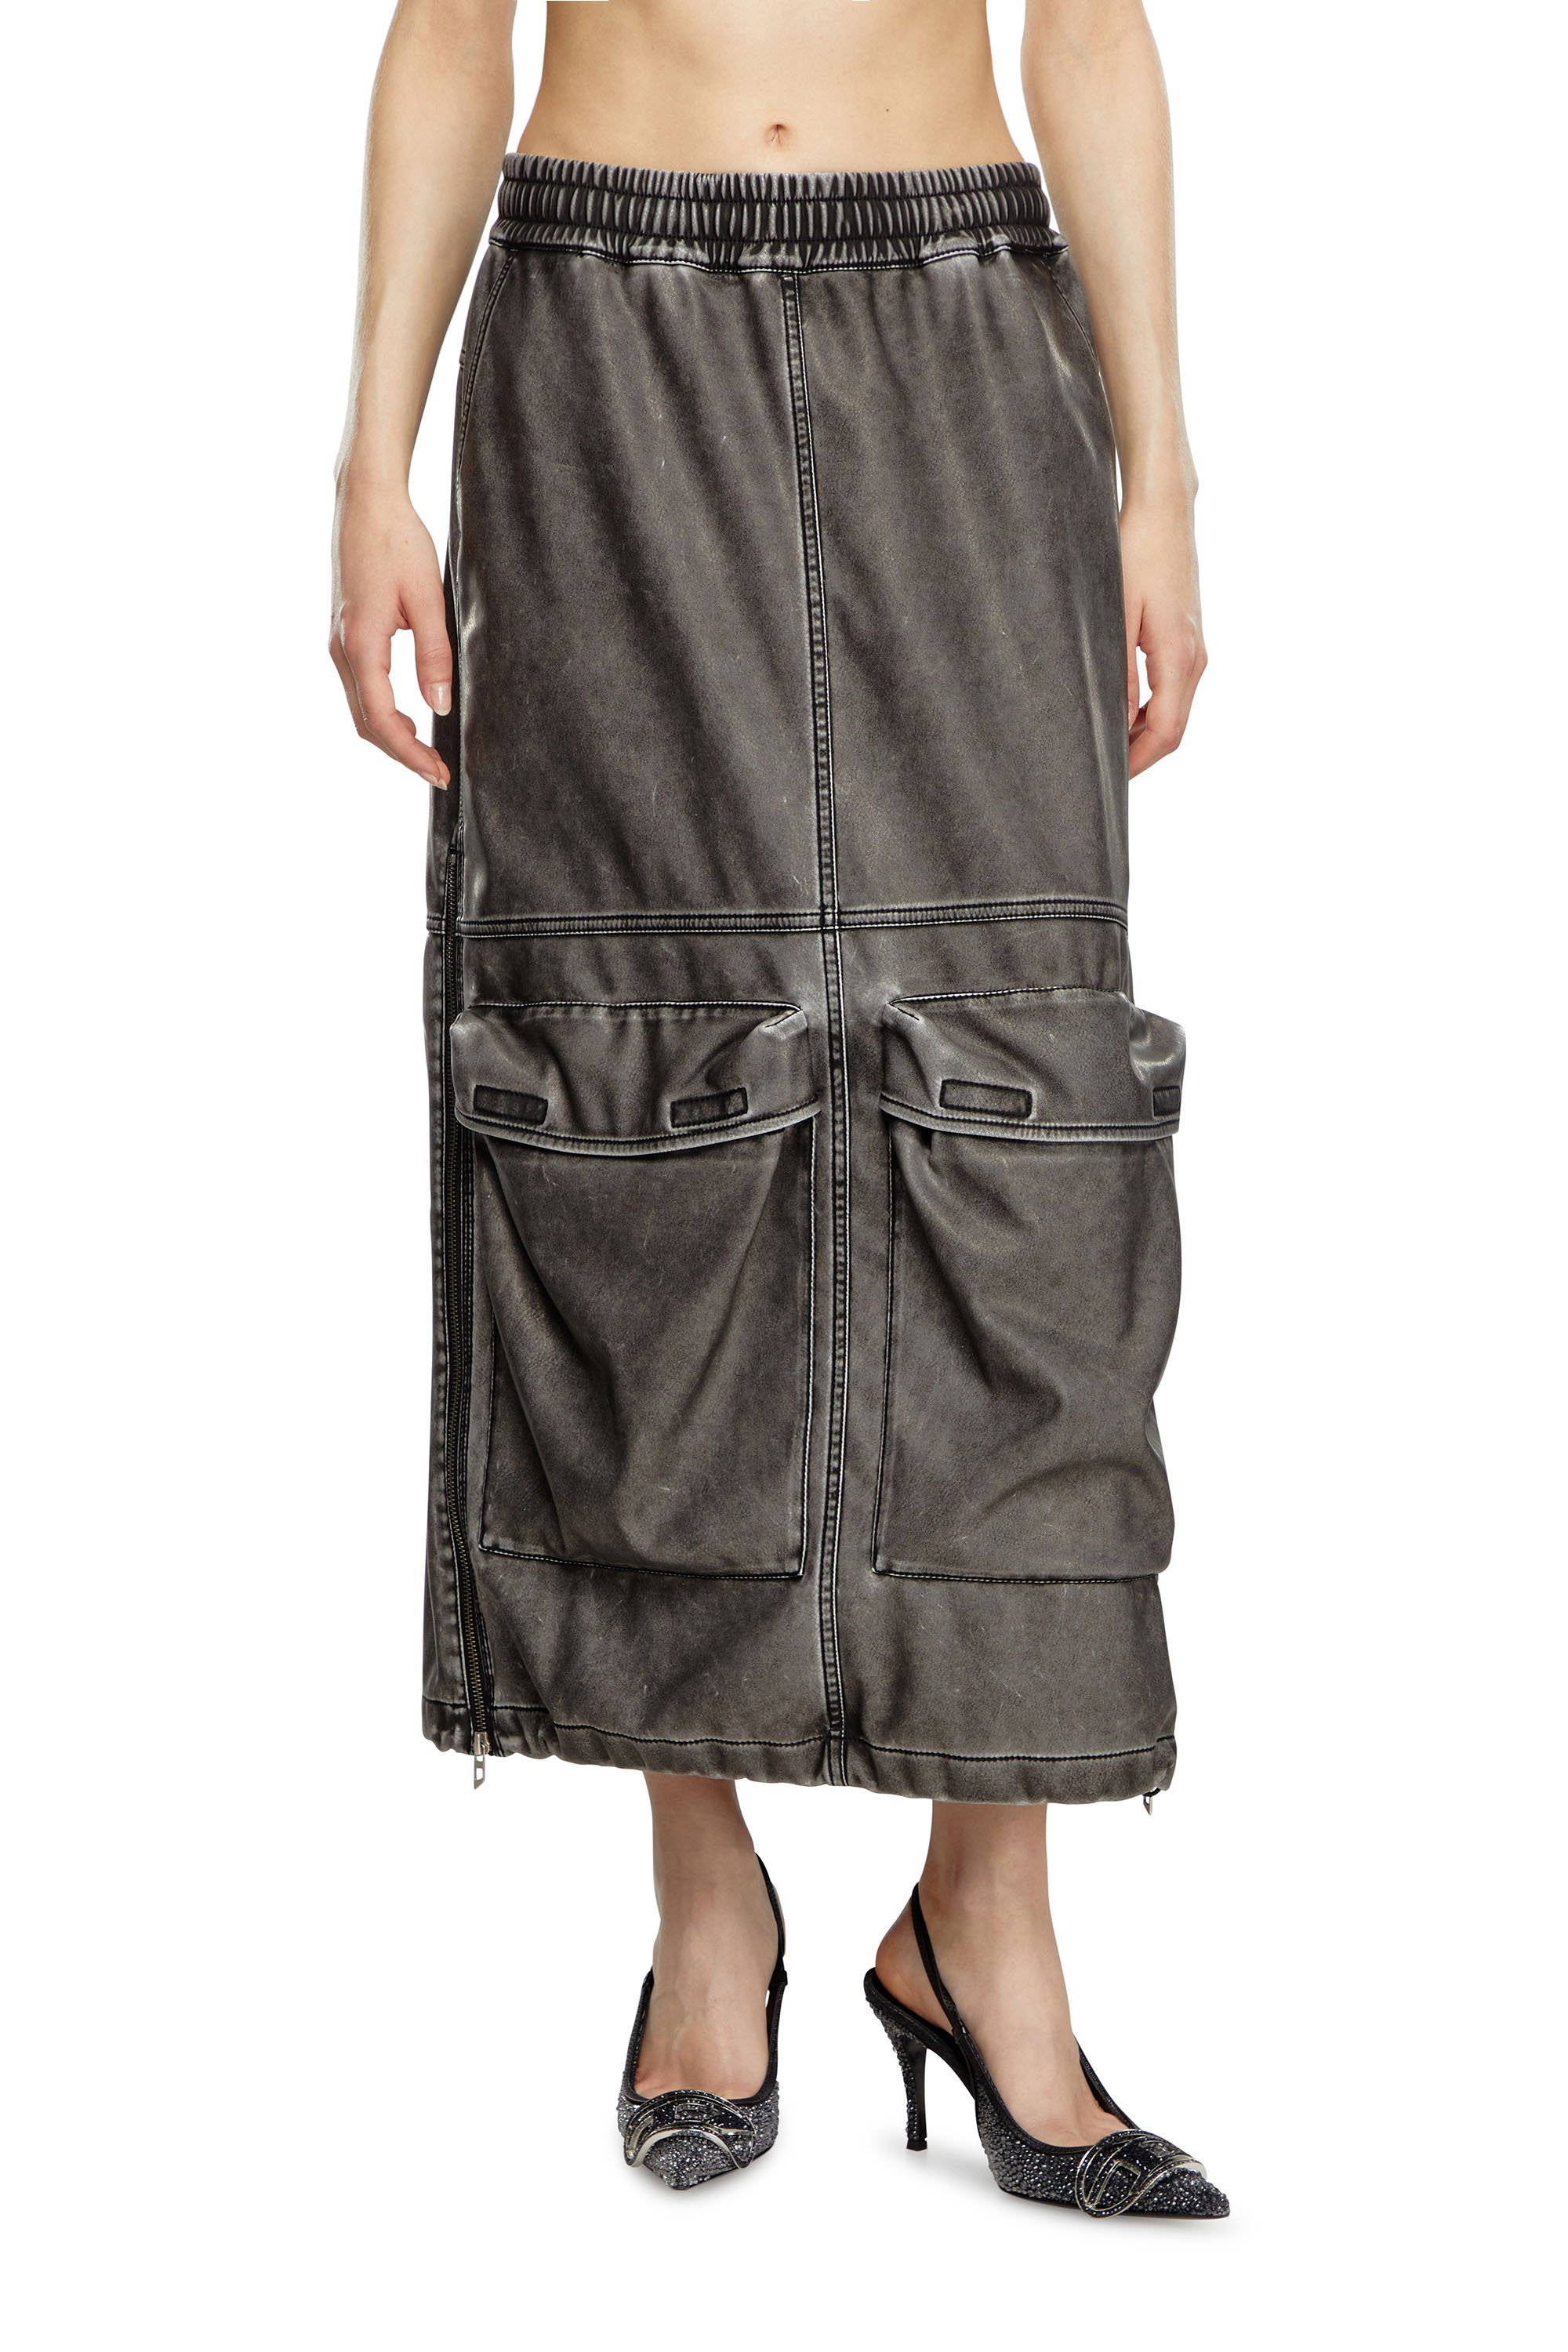 Diesel - O-DYSSEY-P1, Female Long skirt in washed tech fabric in Grey - Image 1